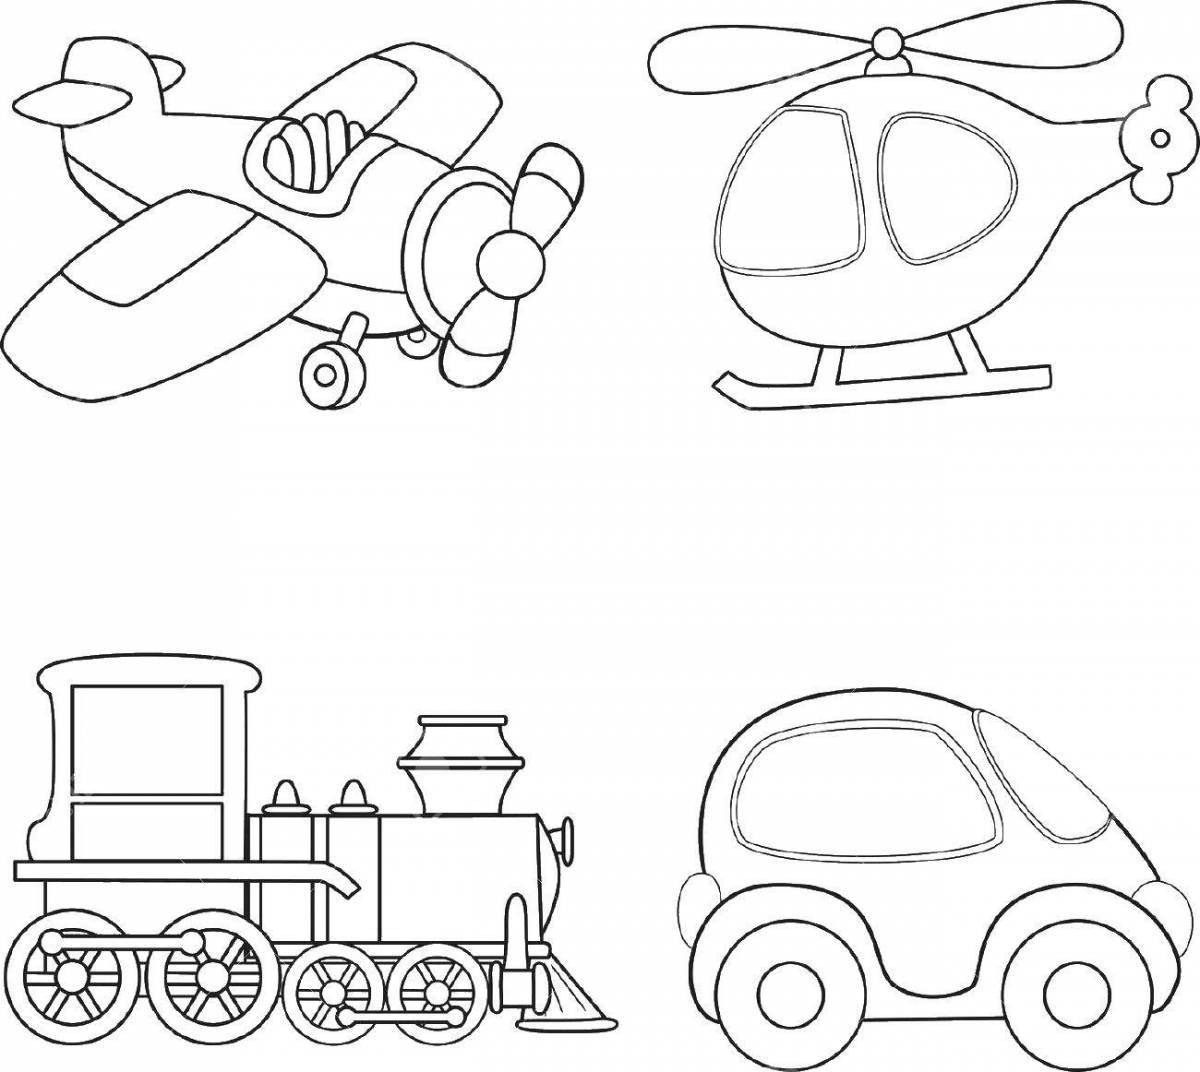 Coloring tractor for children 6-7 years old